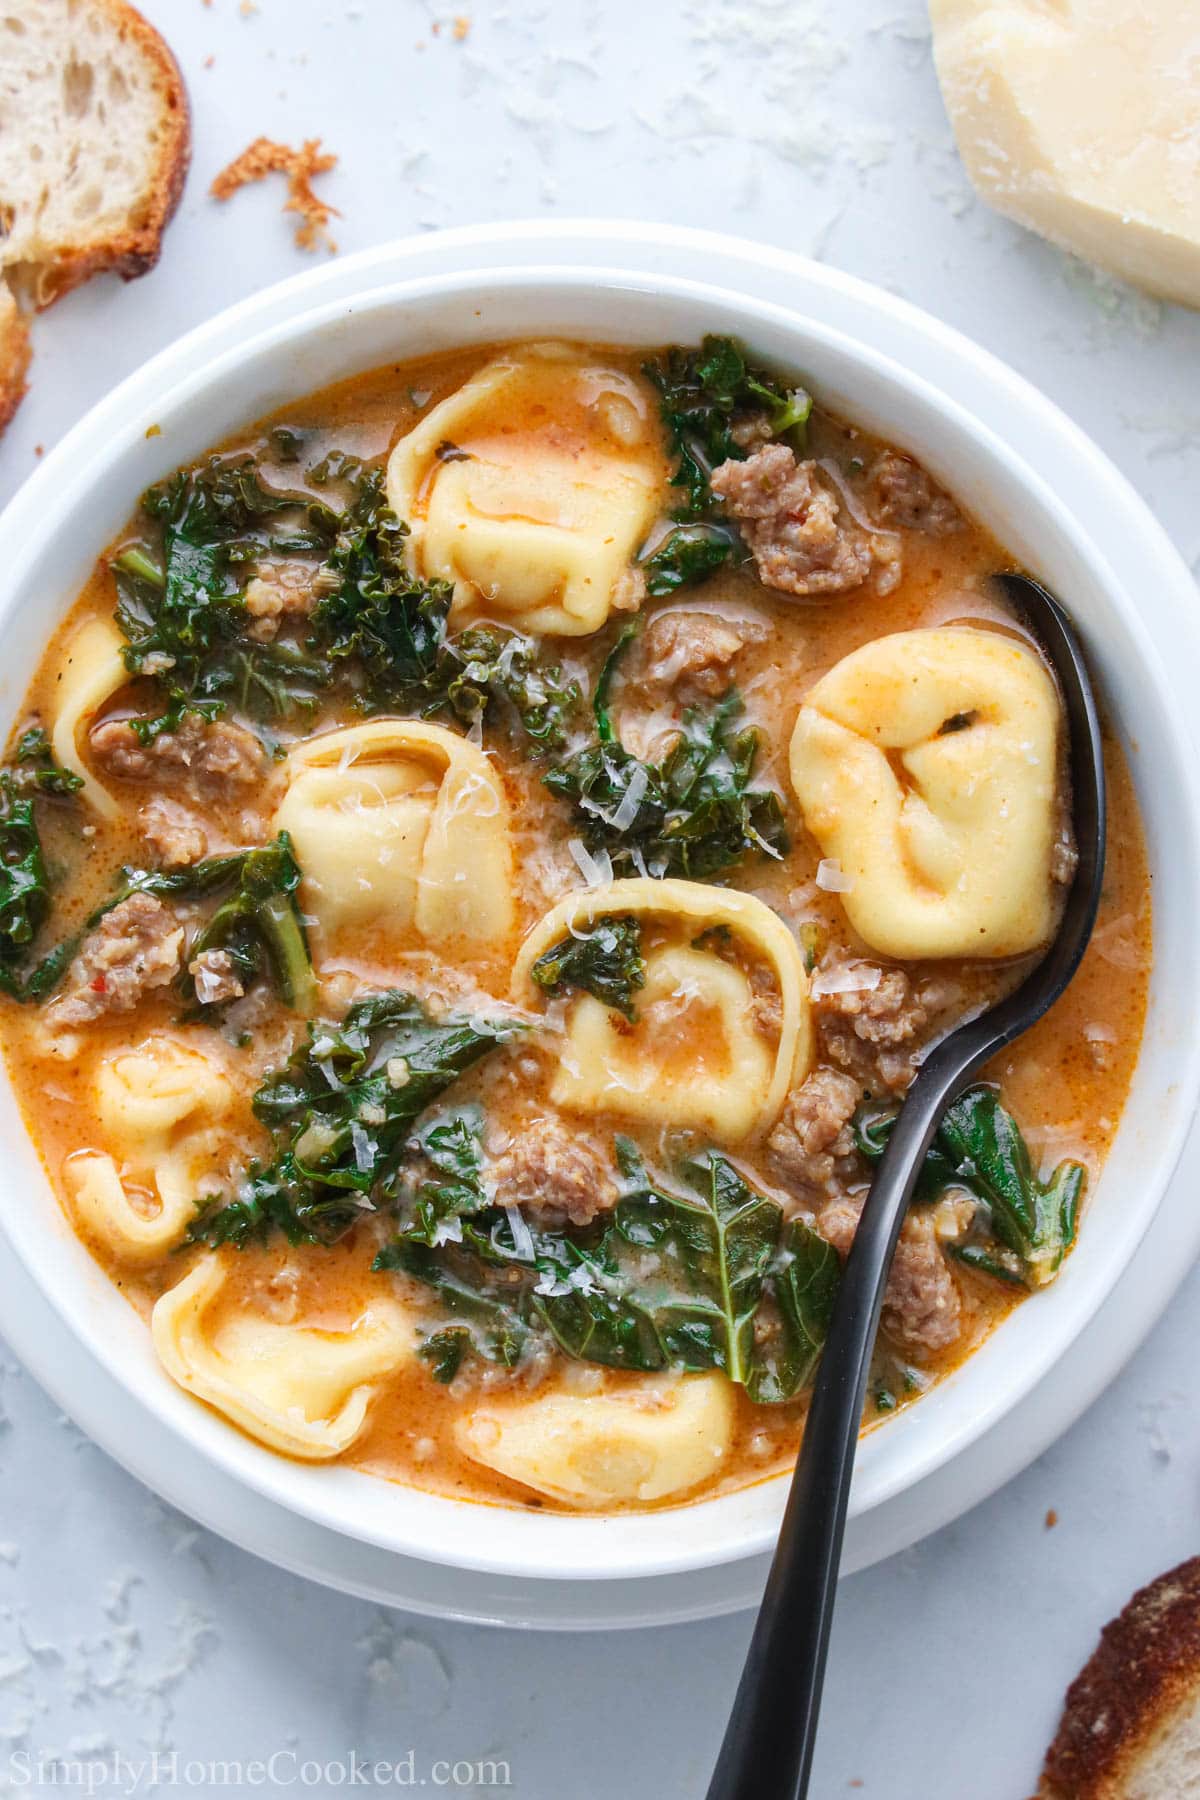 Vertical image of a bowl of Tortellini Soup with a spoon